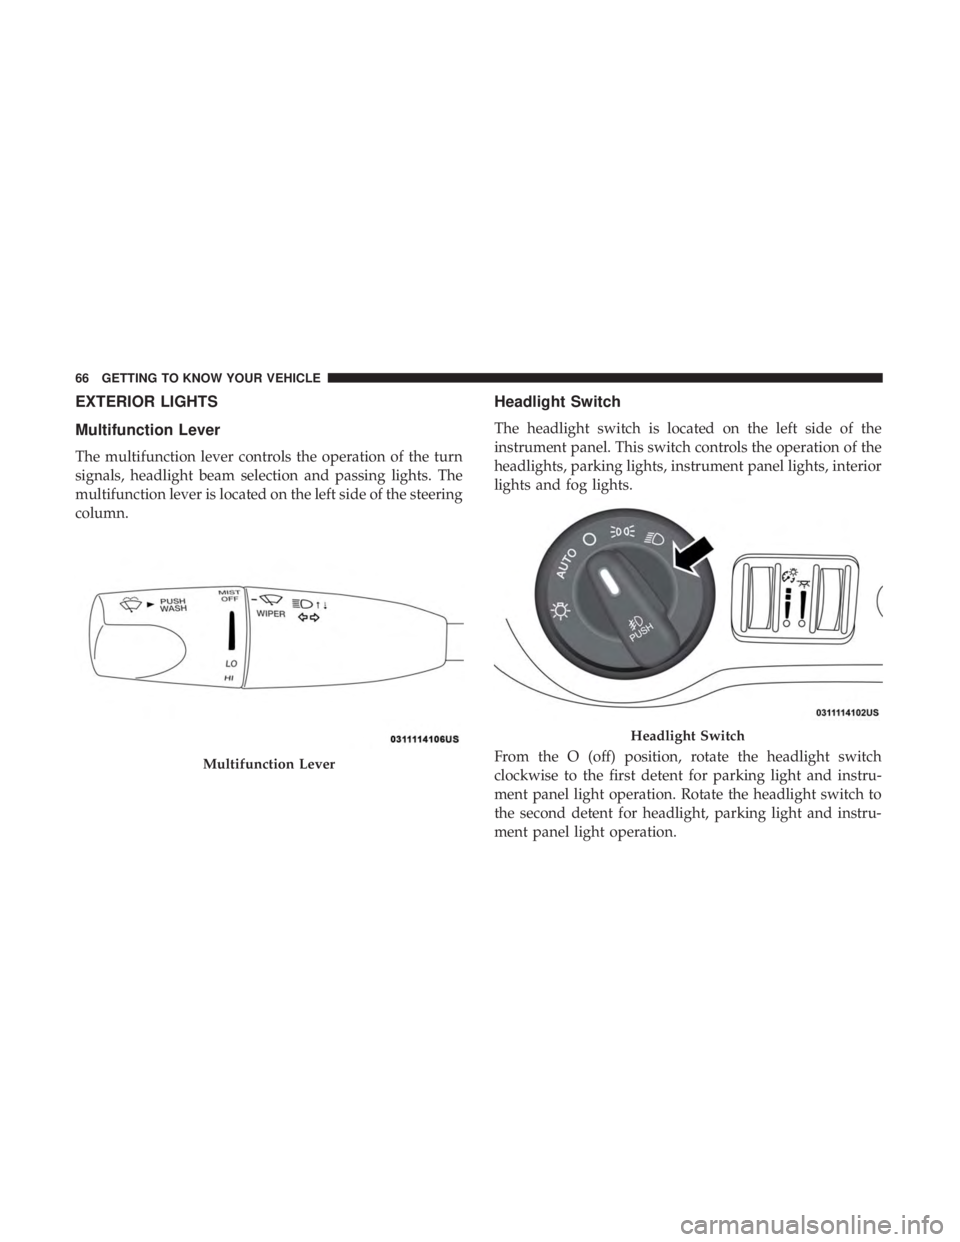 CHRYSLER 300 2019  Owners Manual EXTERIOR LIGHTS
Multifunction Lever
The multifunction lever controls the operation of the turn
signals, headlight beam selection and passing lights. The
multifunction lever is located on the left side